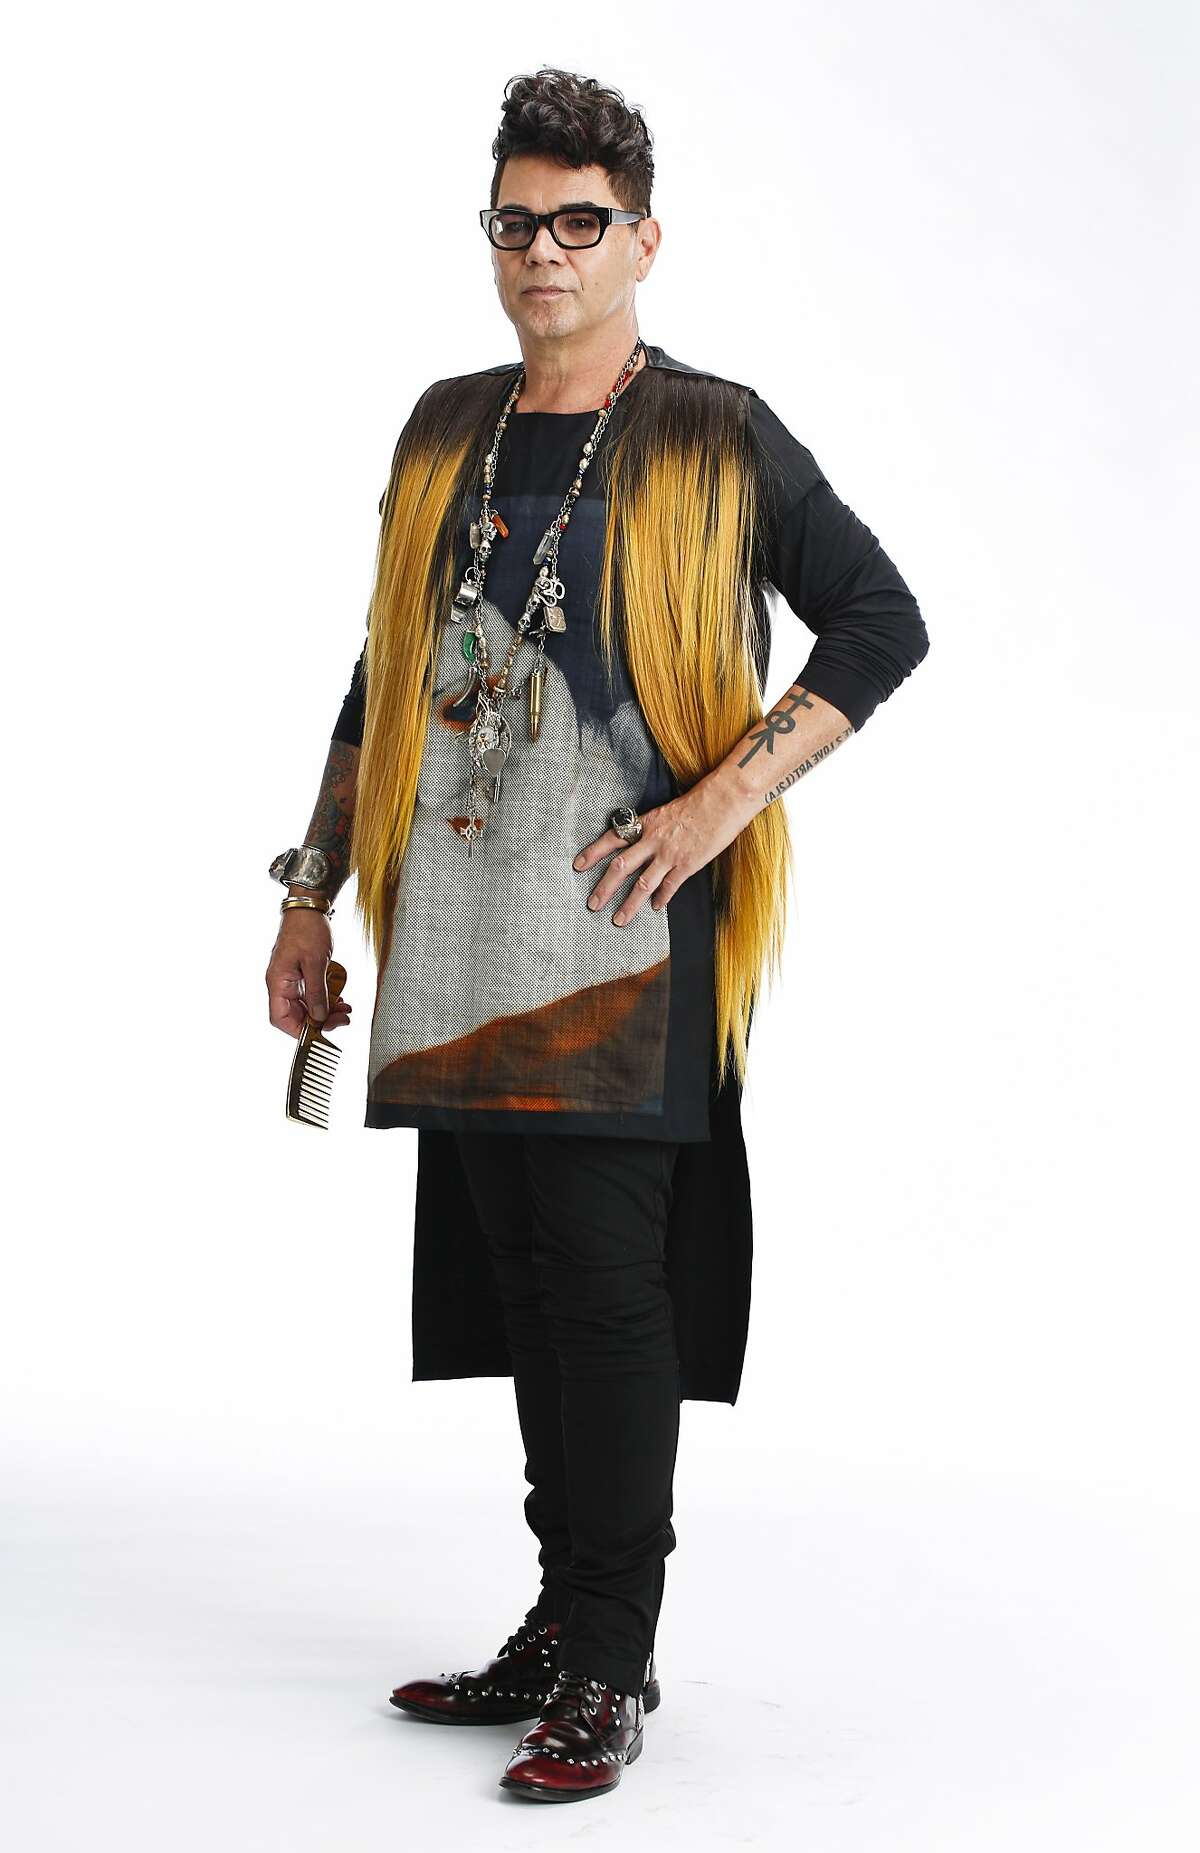 David Reposar, stylist and art director, is seen wearing a self-designed digital geisha tunic, human hair vest designed in collaboration Nancy Bui, DeadRinger necklace assembled with charms collected from his world travels, a meteorite ring, and chunky amber cuff from Poland in San Francisco, Calif., on Tuesday, July 15, 2014.